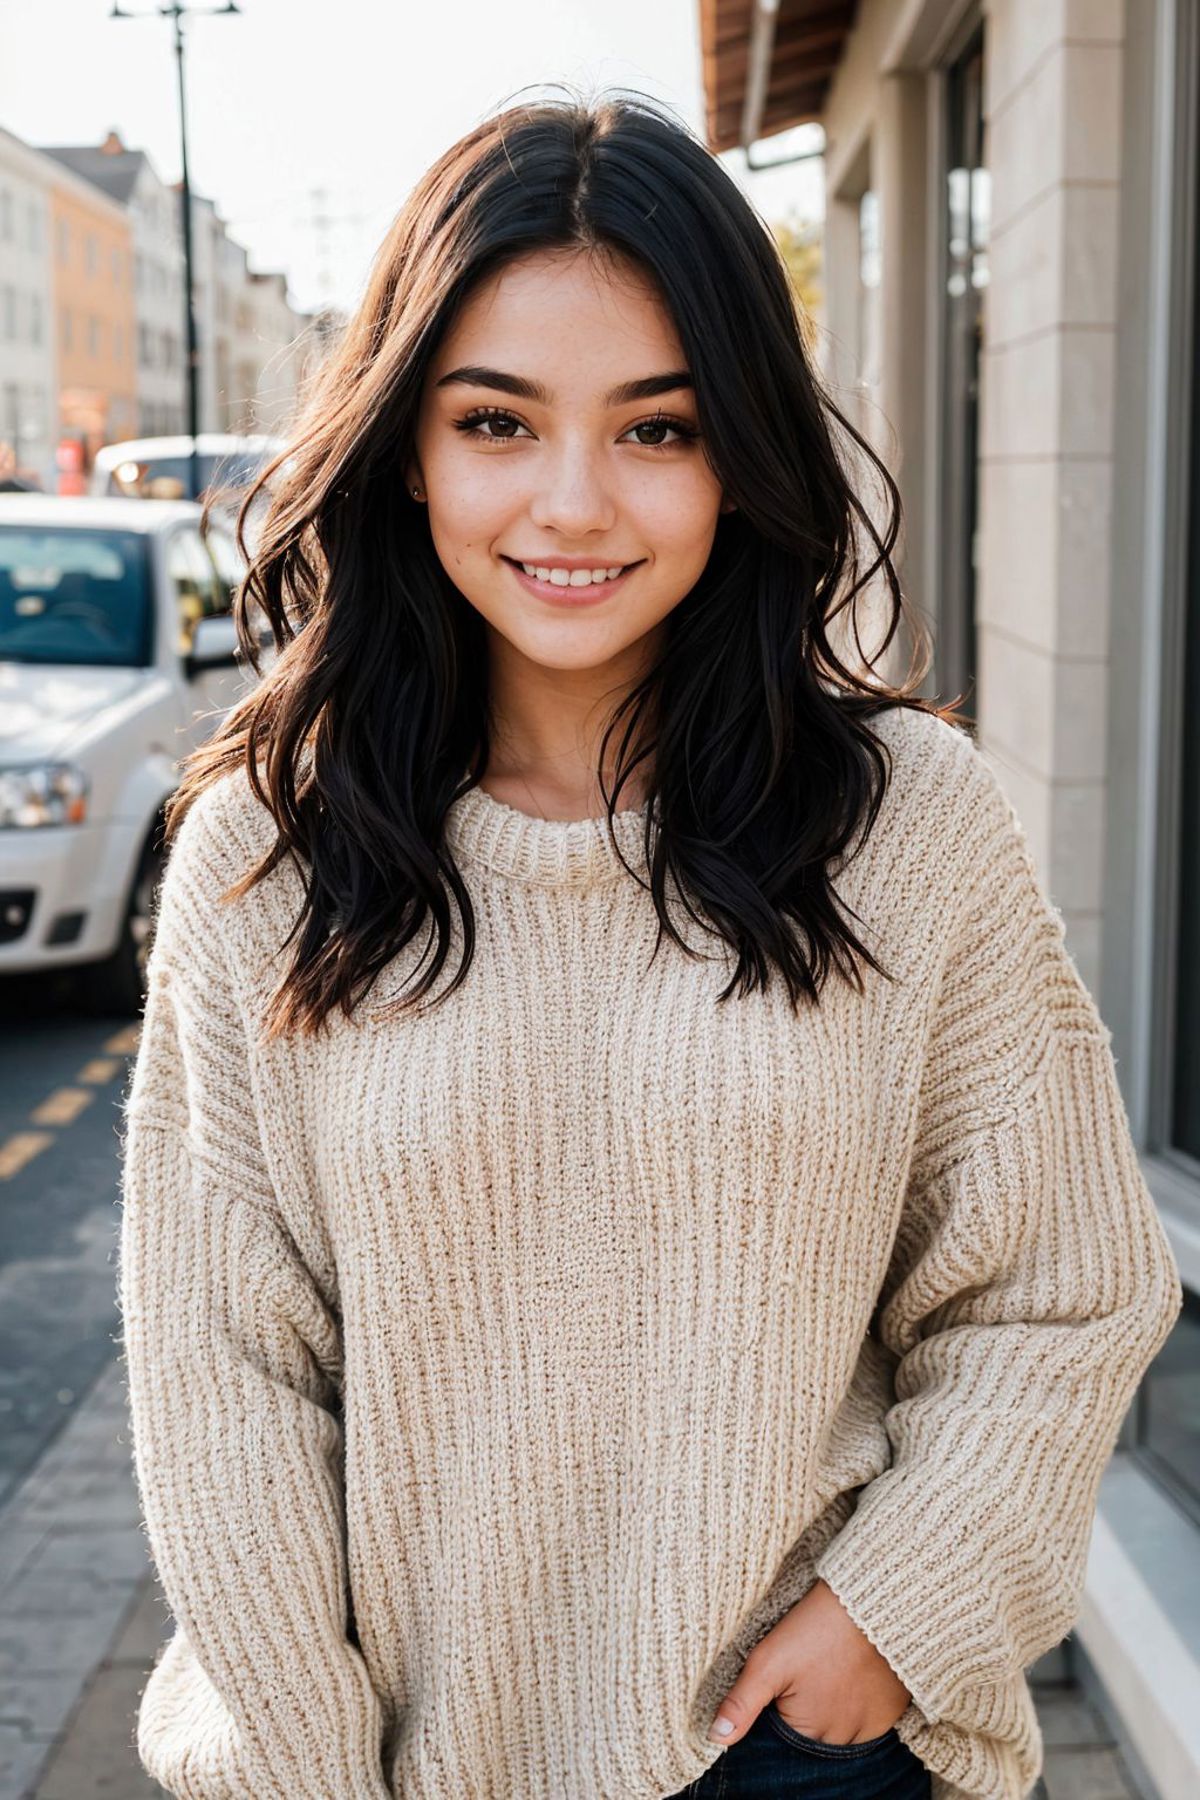 A smiling woman wearing a white sweater.